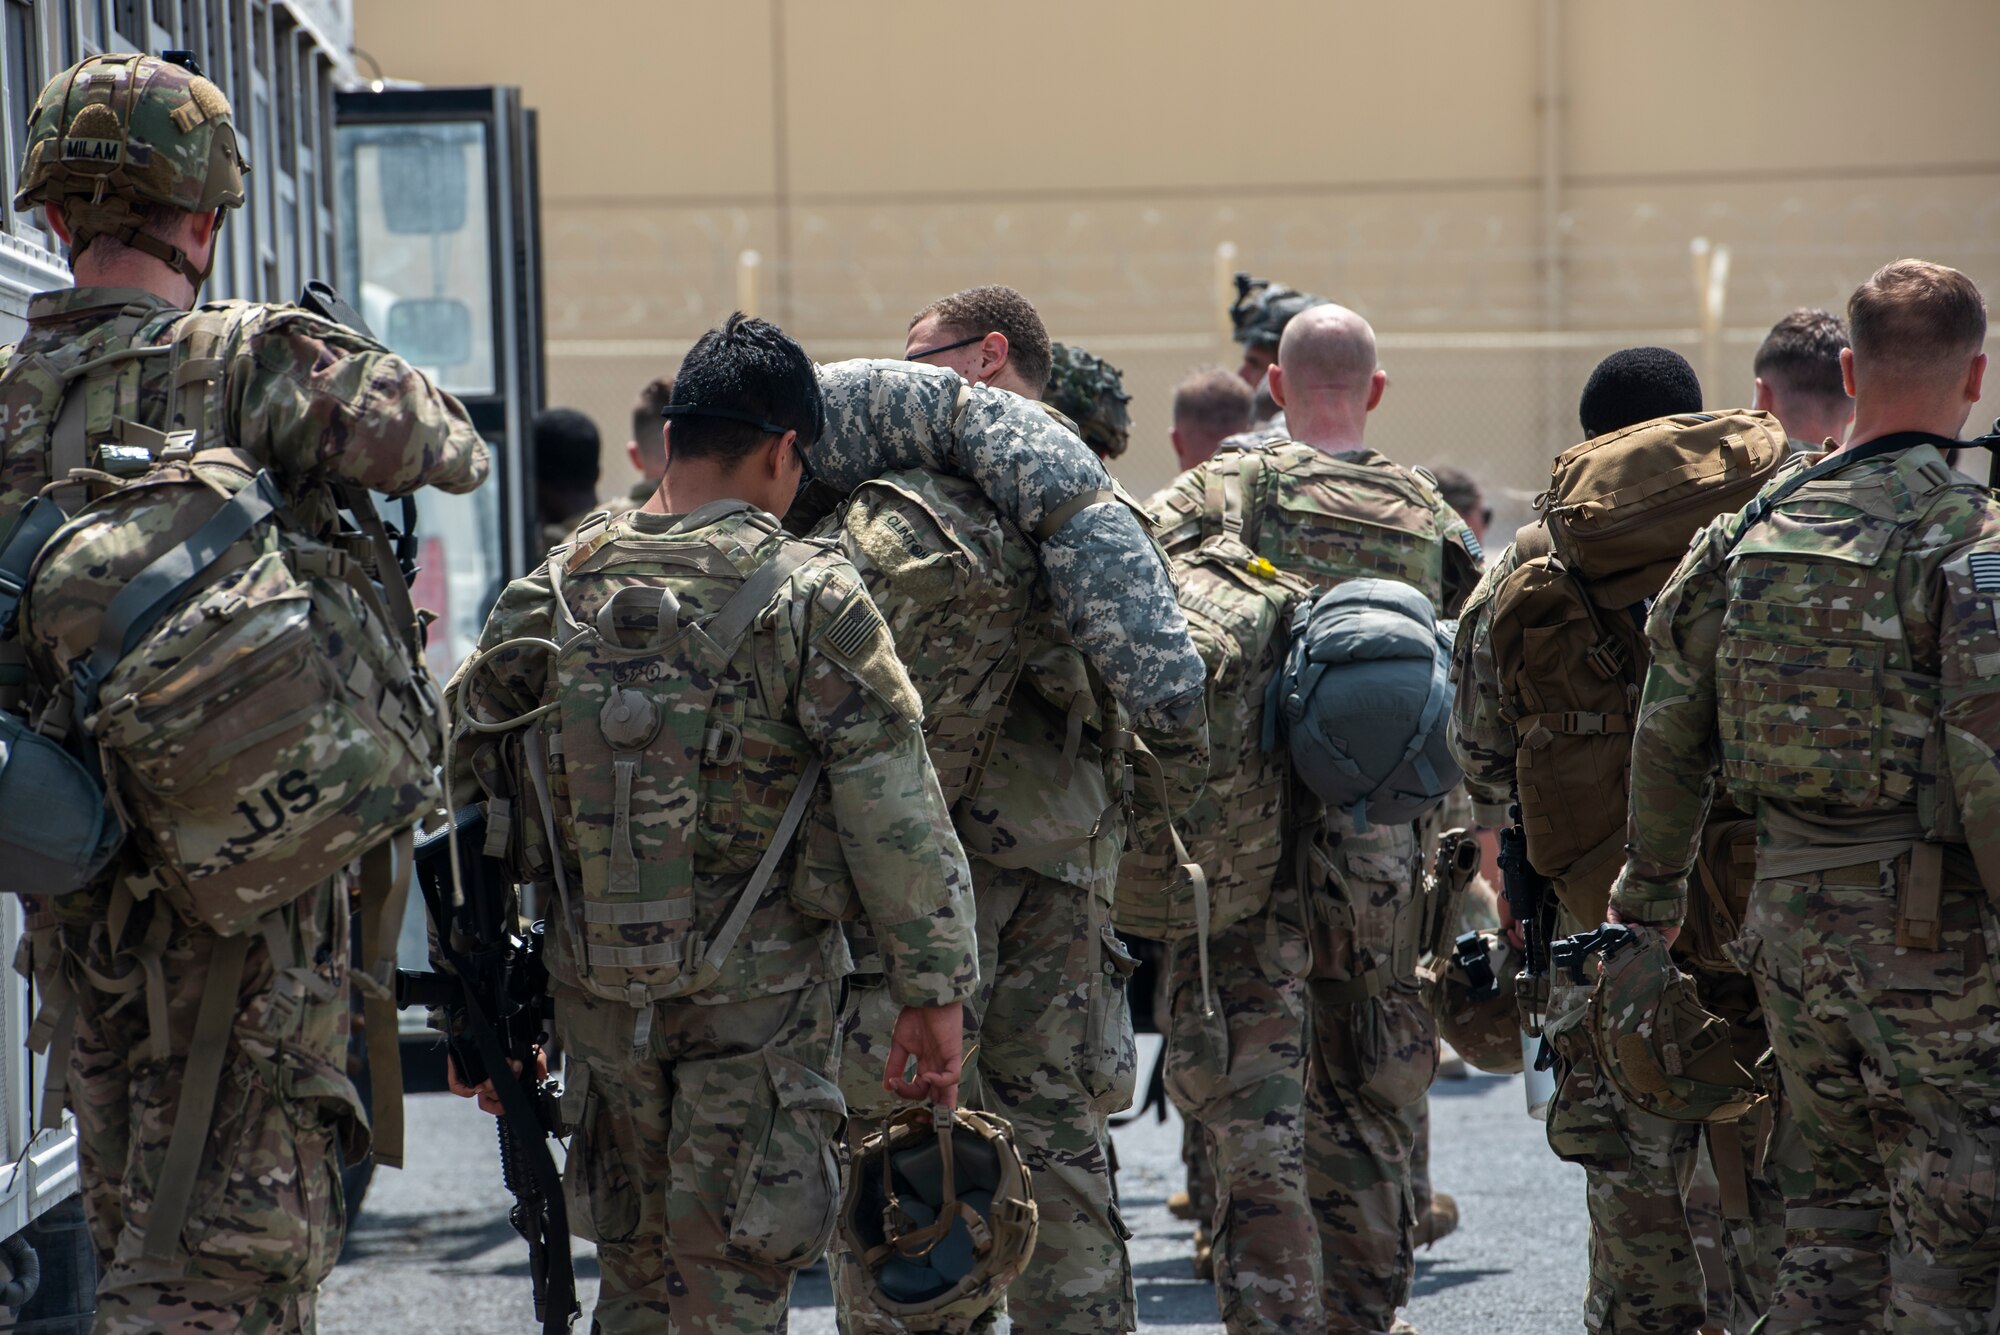 Service members in the CENTCOM area of responsibility prepare to board a bus prior to deploying to Afghanistan Aug. 19, 2021, at Al Udeid Air Base, Qatar.